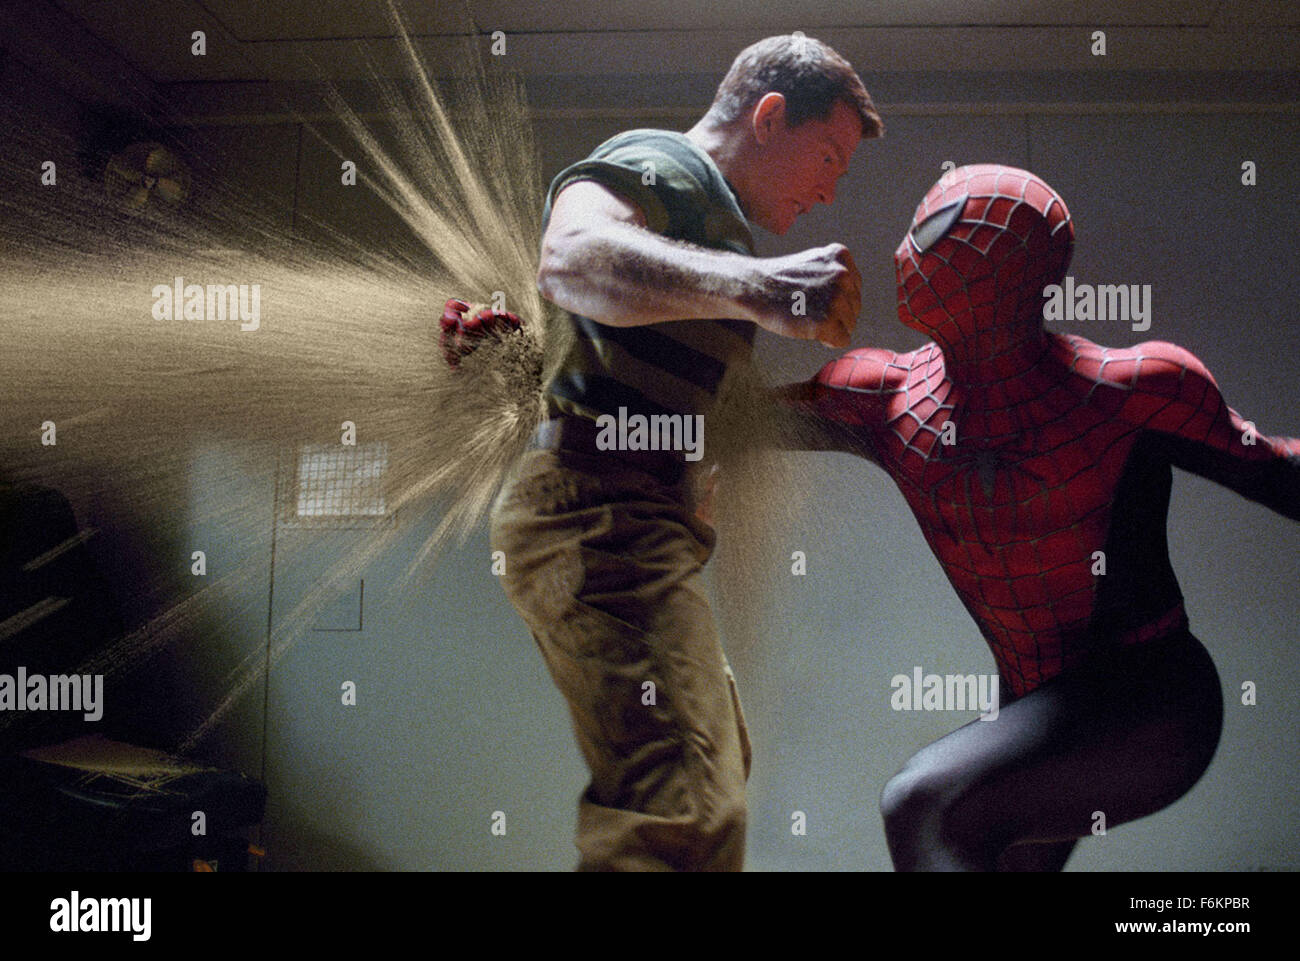 Apr 13, 2007 - New York, NY, USA - RELEASE DATE: May 4, 2007. DIRECTOR: Sam Raimi. STUDIO: Columbia Pictures. PLOT: A strange black entity from another world bonds with Peter Parker and causes inner turmoil as he contends with new villains, temptations, and revenge. PICTURED: TOBEY MAGUIRE and THOMAS HADEN CHURCH (Credit Image: c Columbia Pictures) RESTRICTIONS: This is a publicly distributed film, television or publicity photograph. Non-editorial use may require additional clearances. Stock Photo